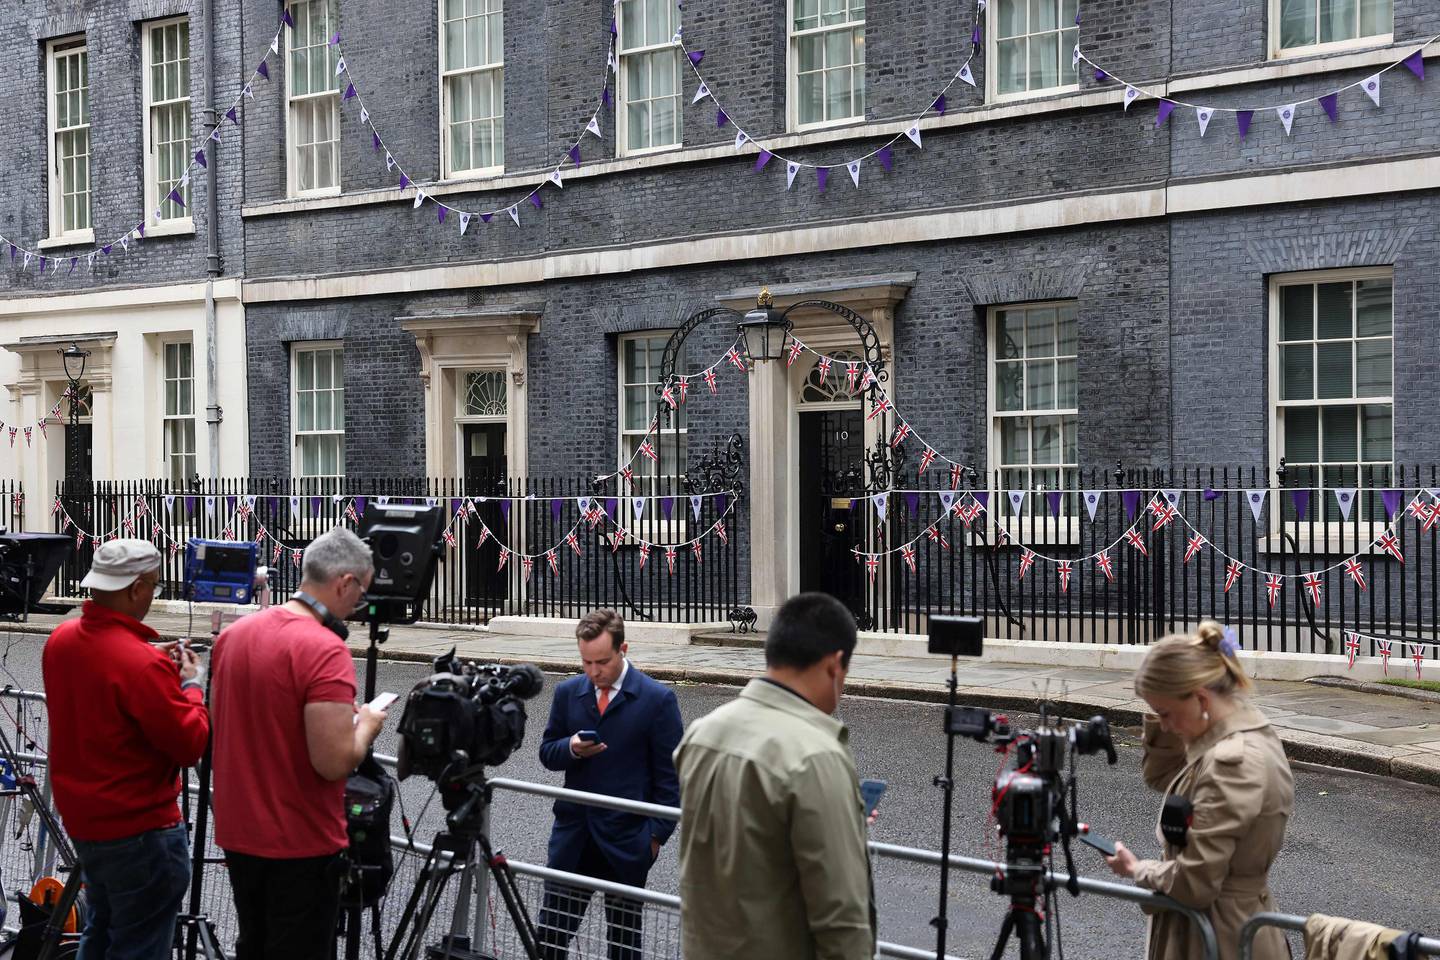 Members of the media wait outside of 10 Downing Street on Monday morning. AFP